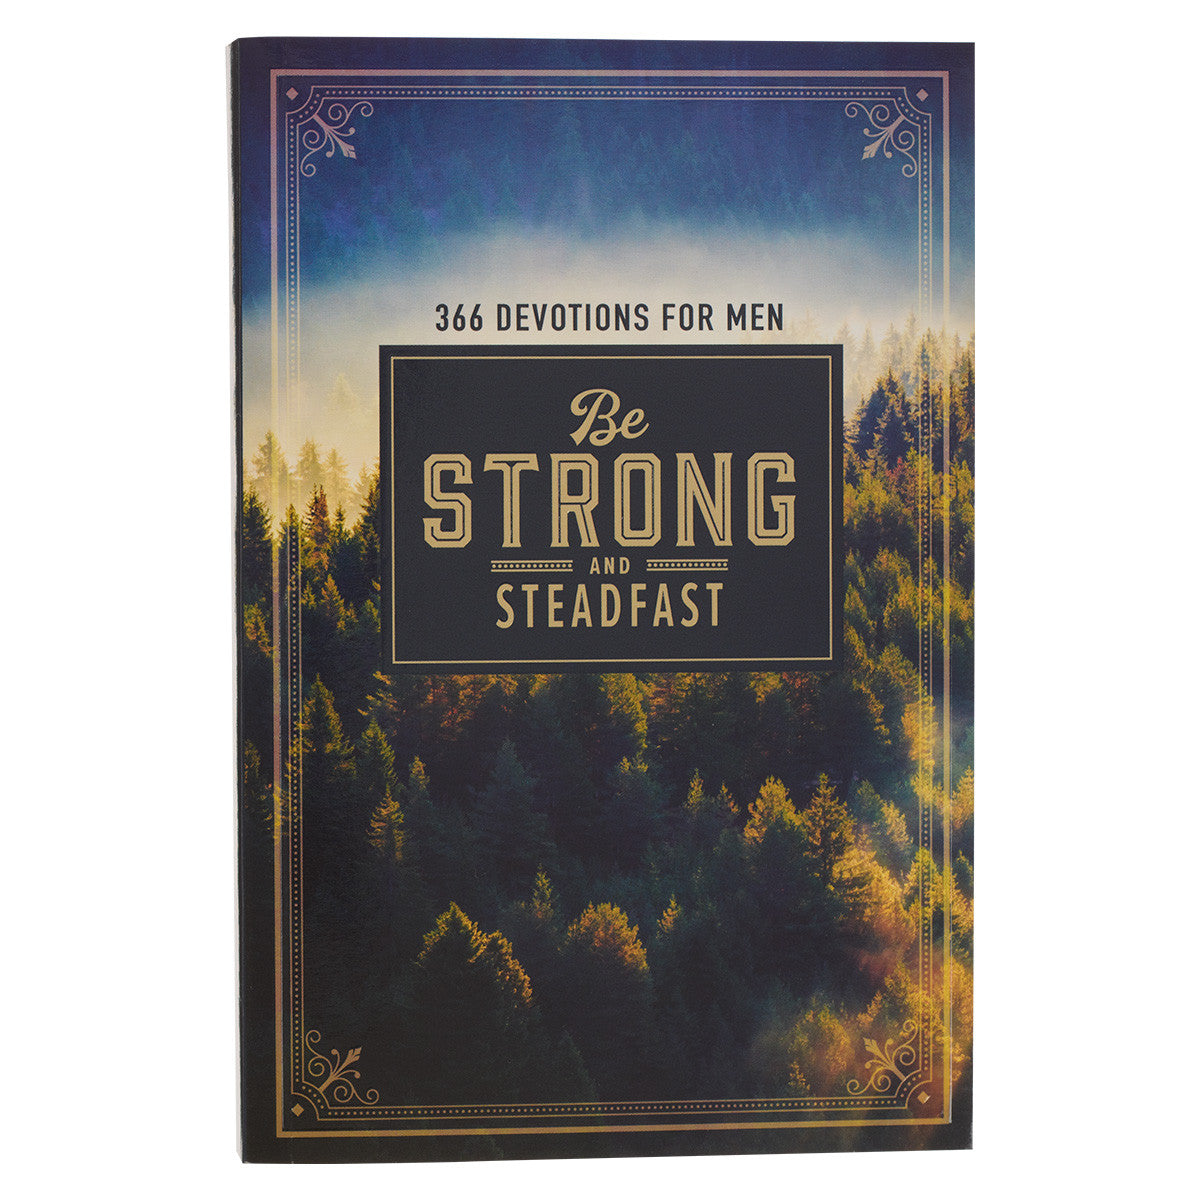 Be Strong and Steadfast, 366 Devotions for Men